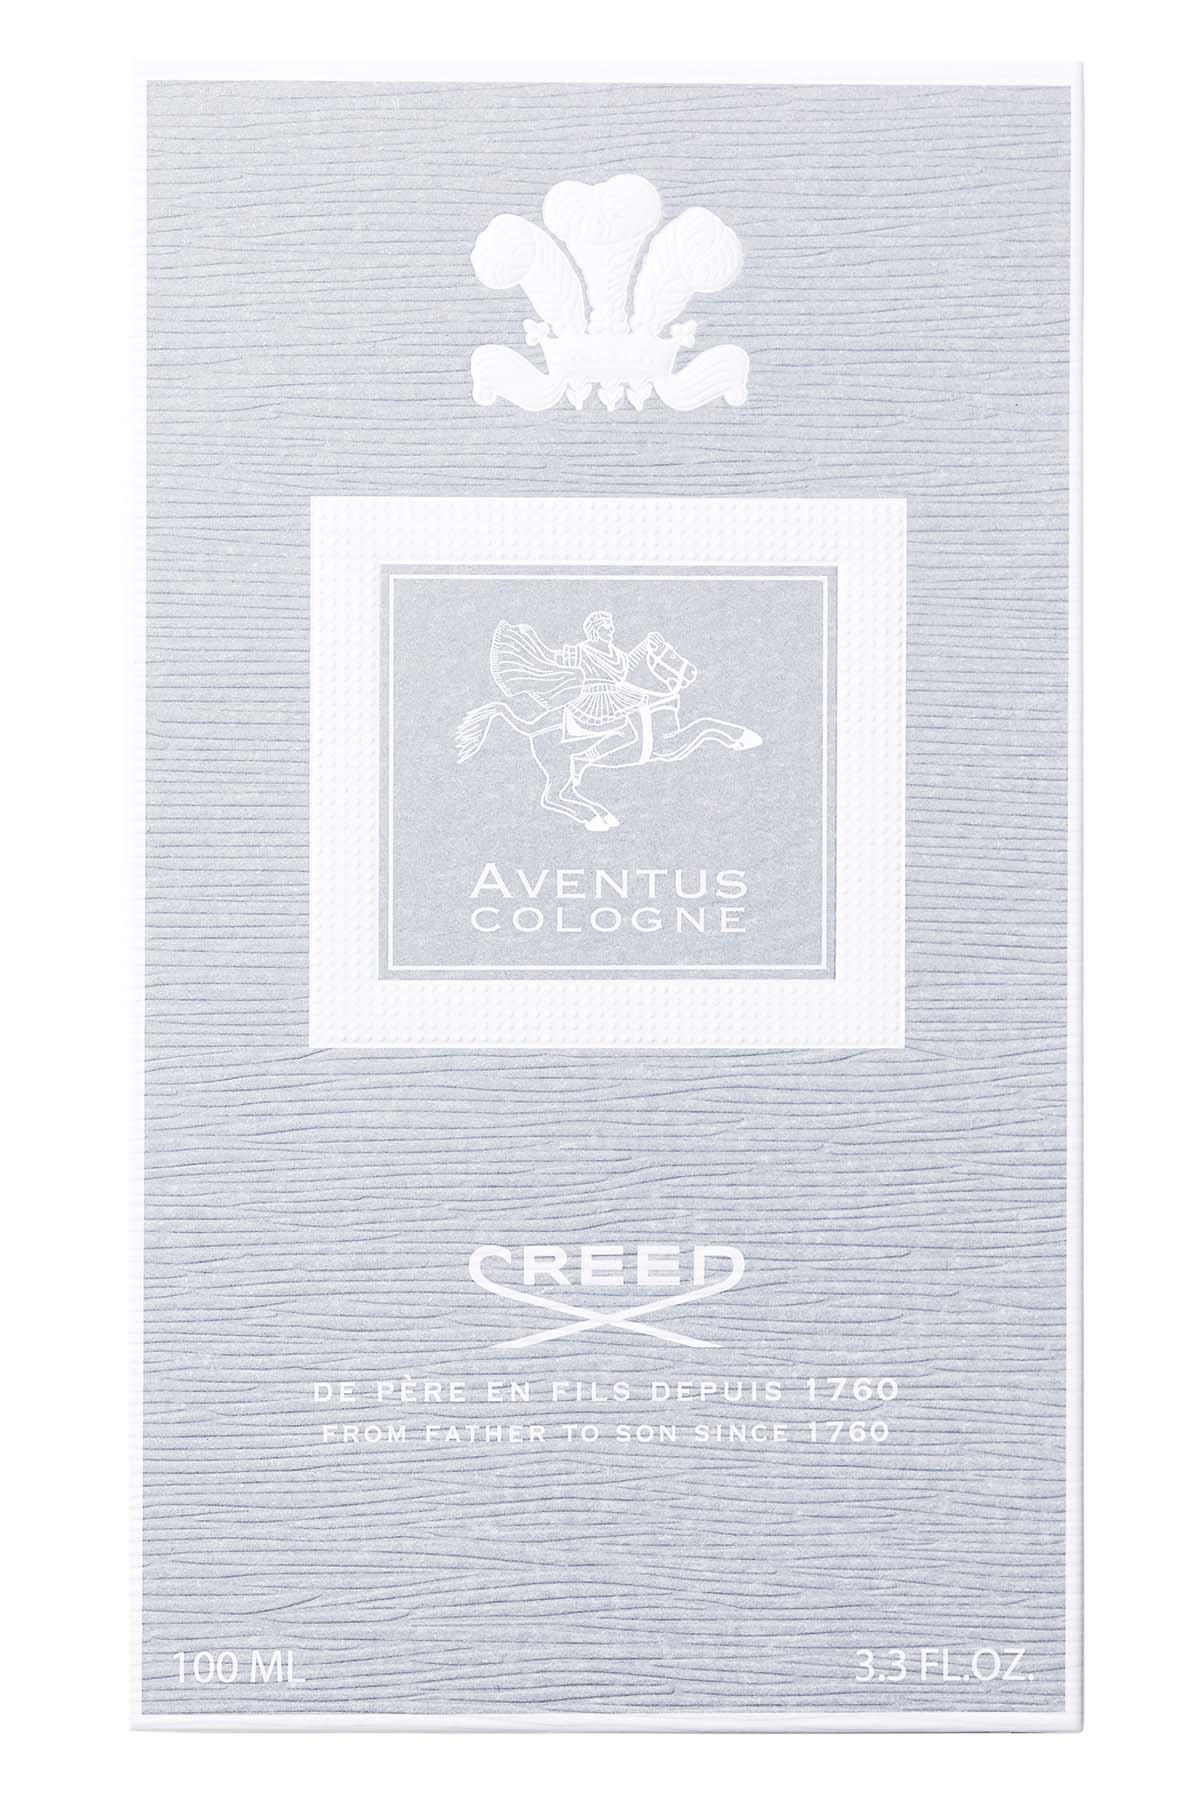 Creed Aventus Cologne Woody, Citrus, Fruity & Fresh